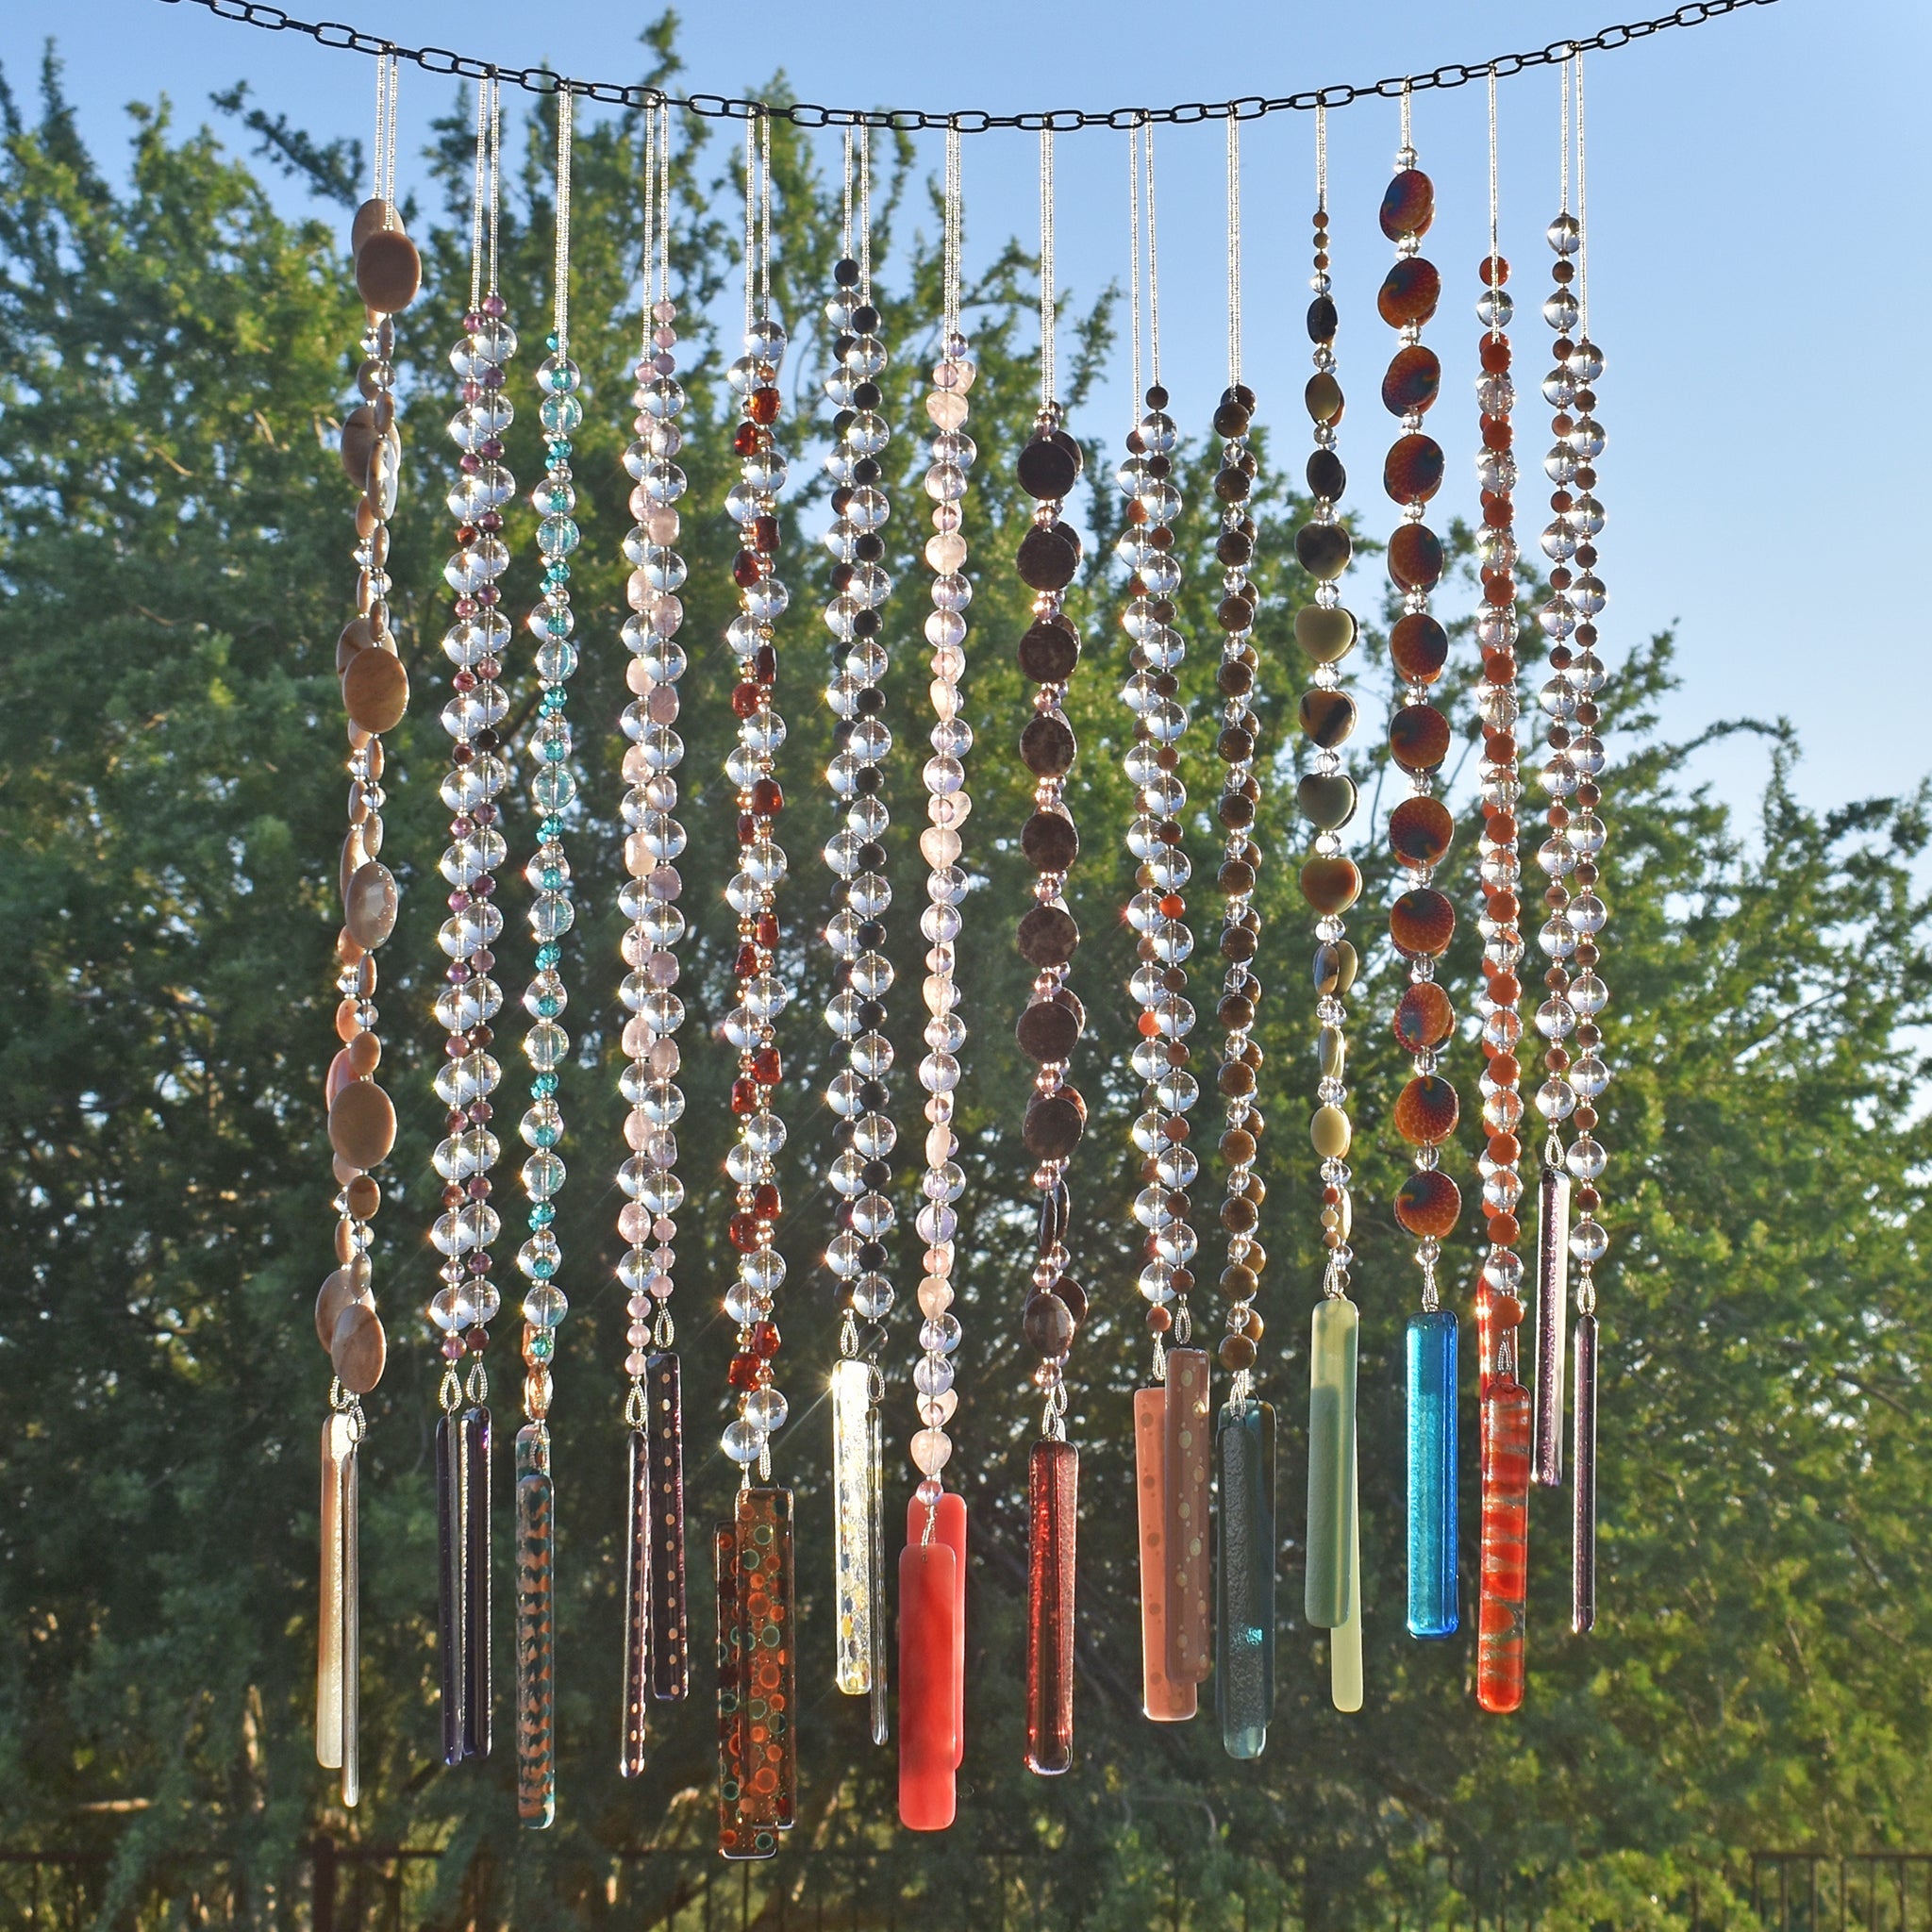 several cinjo handmade wind chimes hanging from chain with ironwood tree and blue sky in background